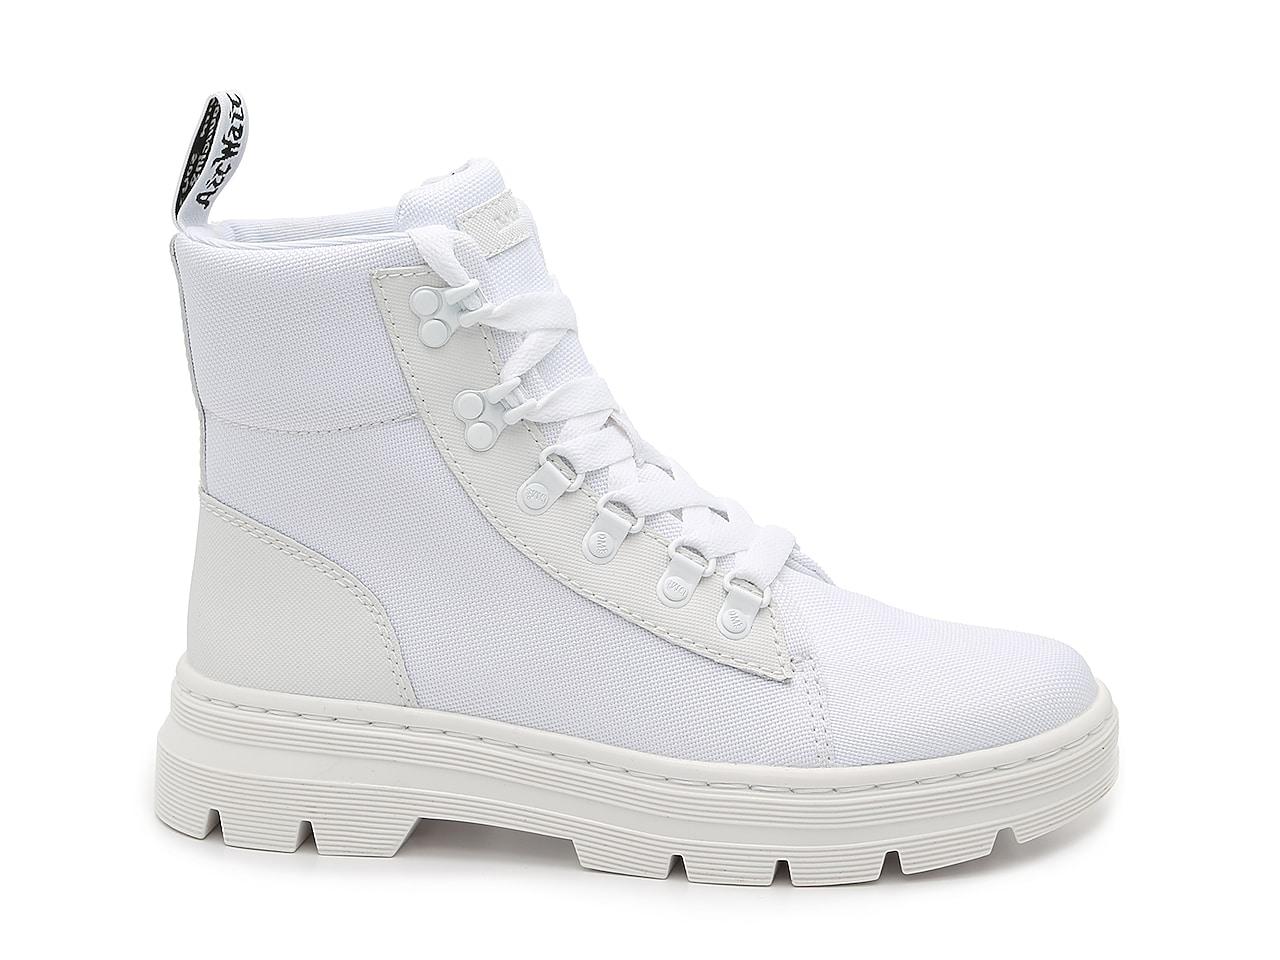 Dr. Martens Synthetic Combs Extra Tough Casual Boot in White+White 